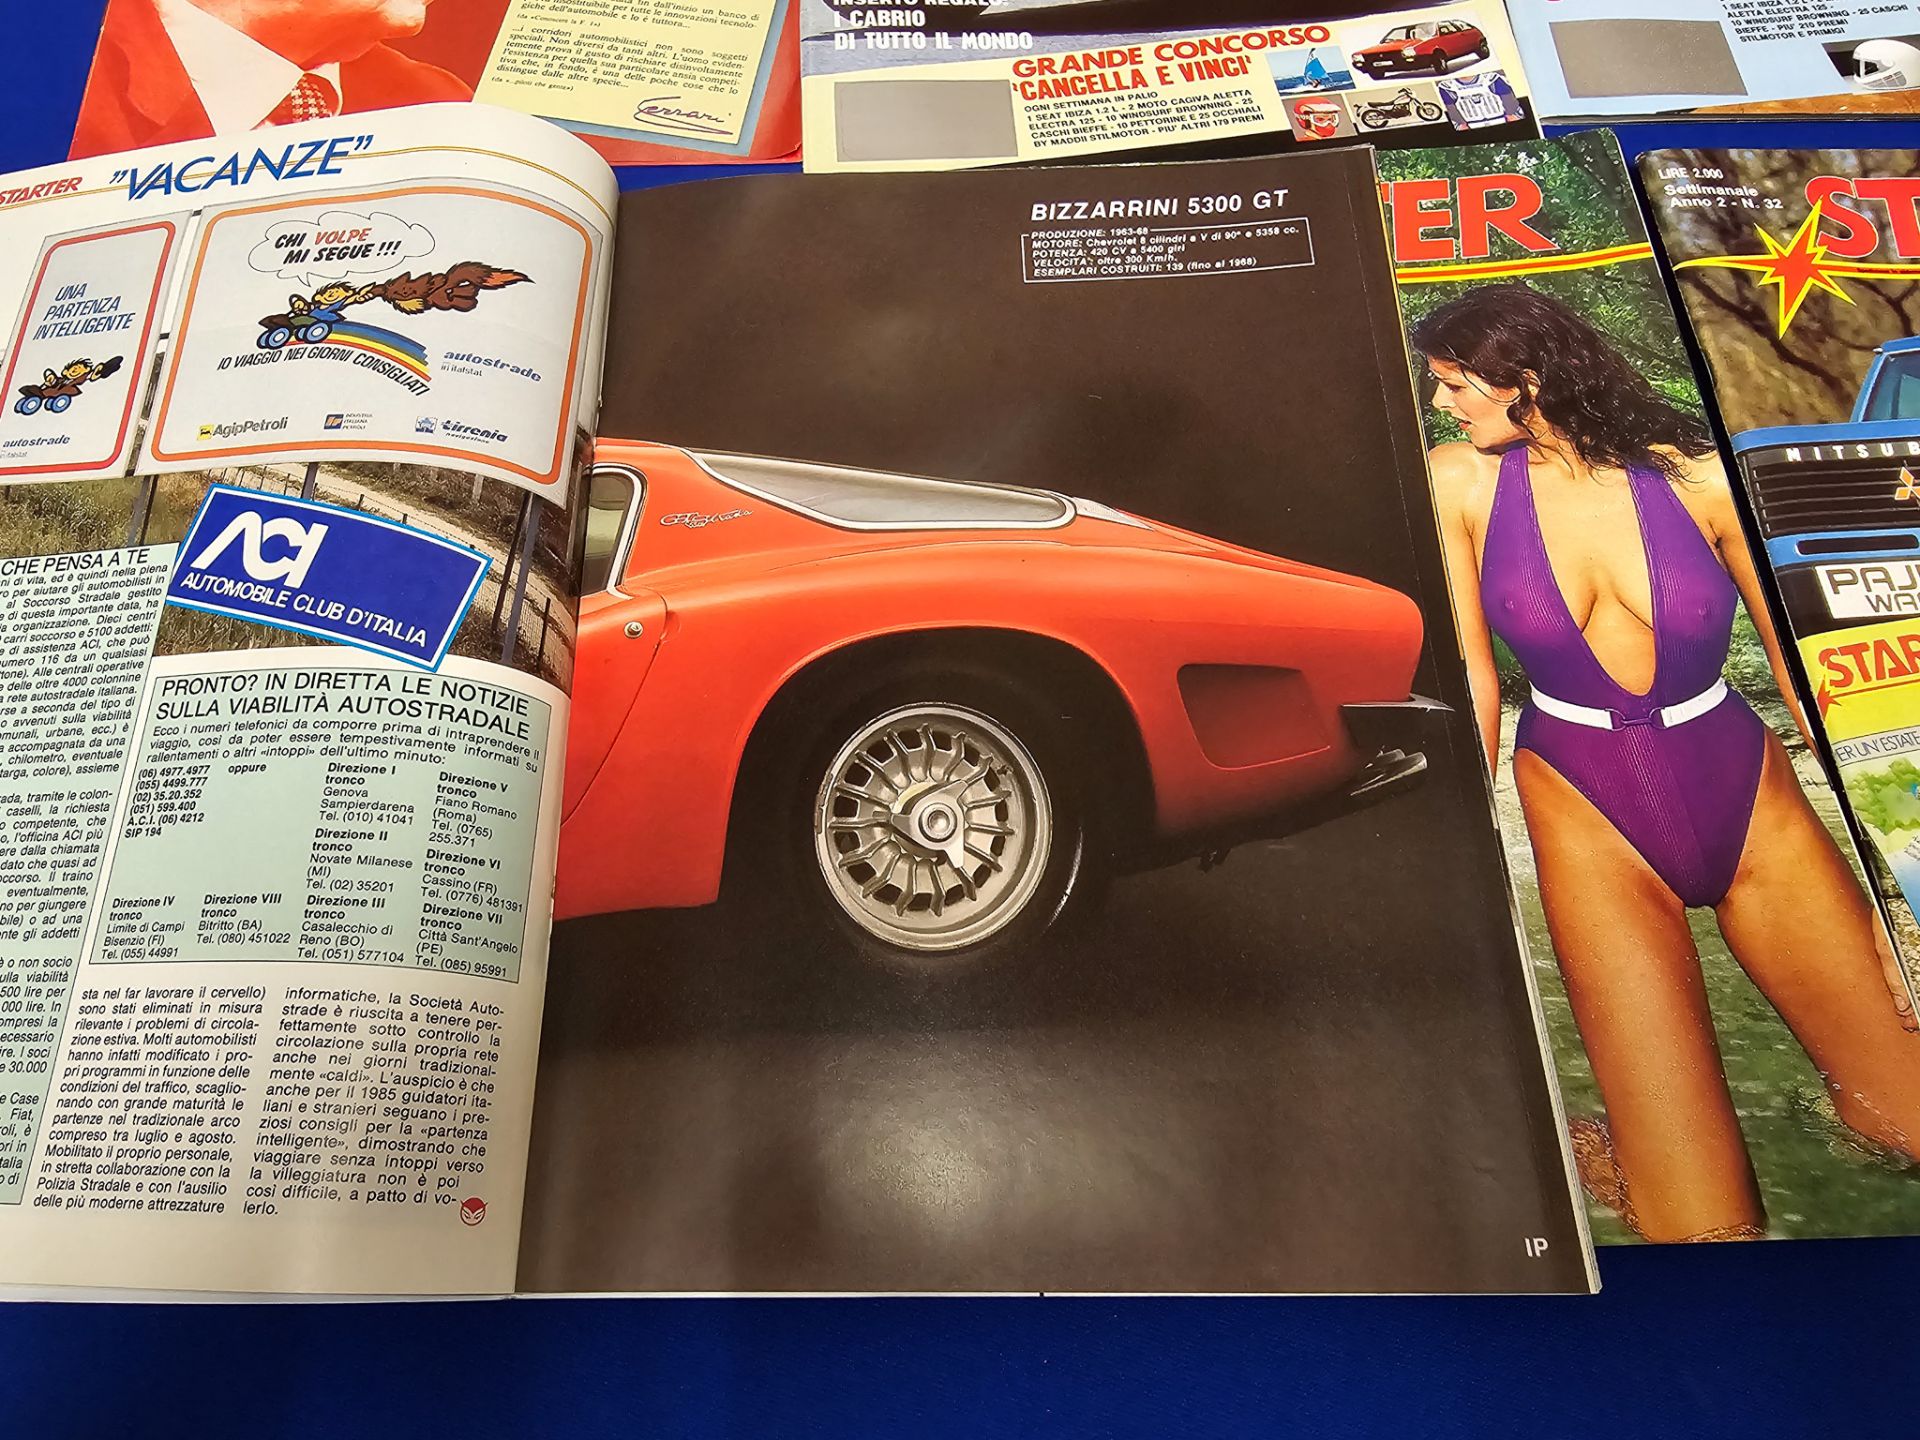 Large Collection of Starter Magazines Italian Cars and Glamour Ladies Ferrari alpha etc - Image 4 of 17